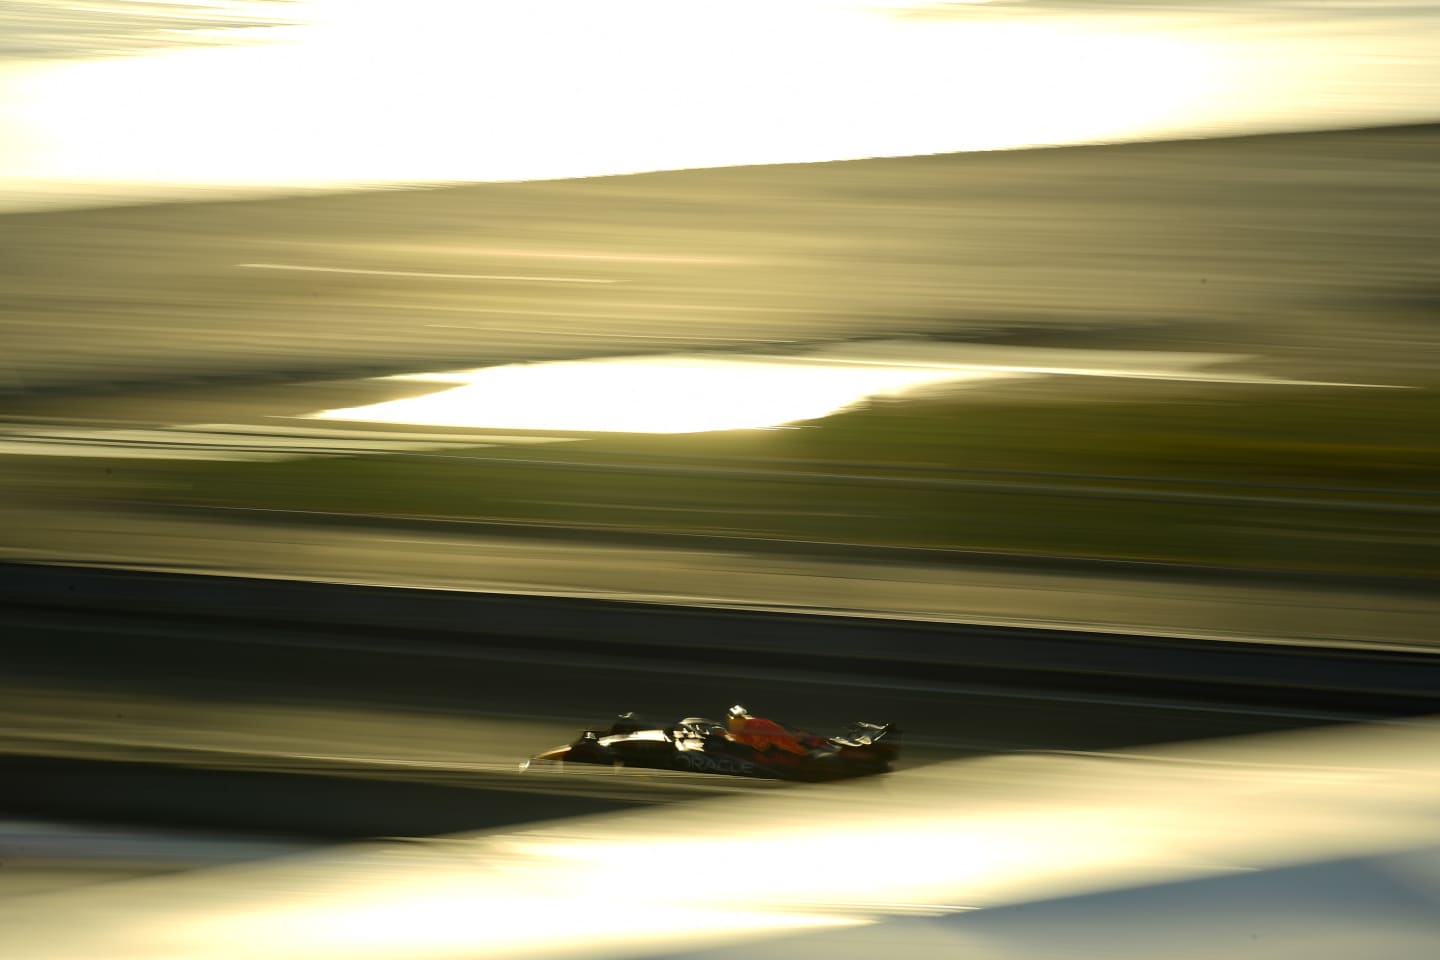 JEDDAH, SAUDI ARABIA - MARCH 25: Sergio Perez of Mexico driving the (11) Oracle Red Bull Racing RB18 on track during practice ahead of the F1 Grand Prix of Saudi Arabia at the Jeddah Corniche Circuit on March 25, 2022 in Jeddah, Saudi Arabia. (Photo by Mario Renzi - Formula 1/Formula 1 via Getty Images)